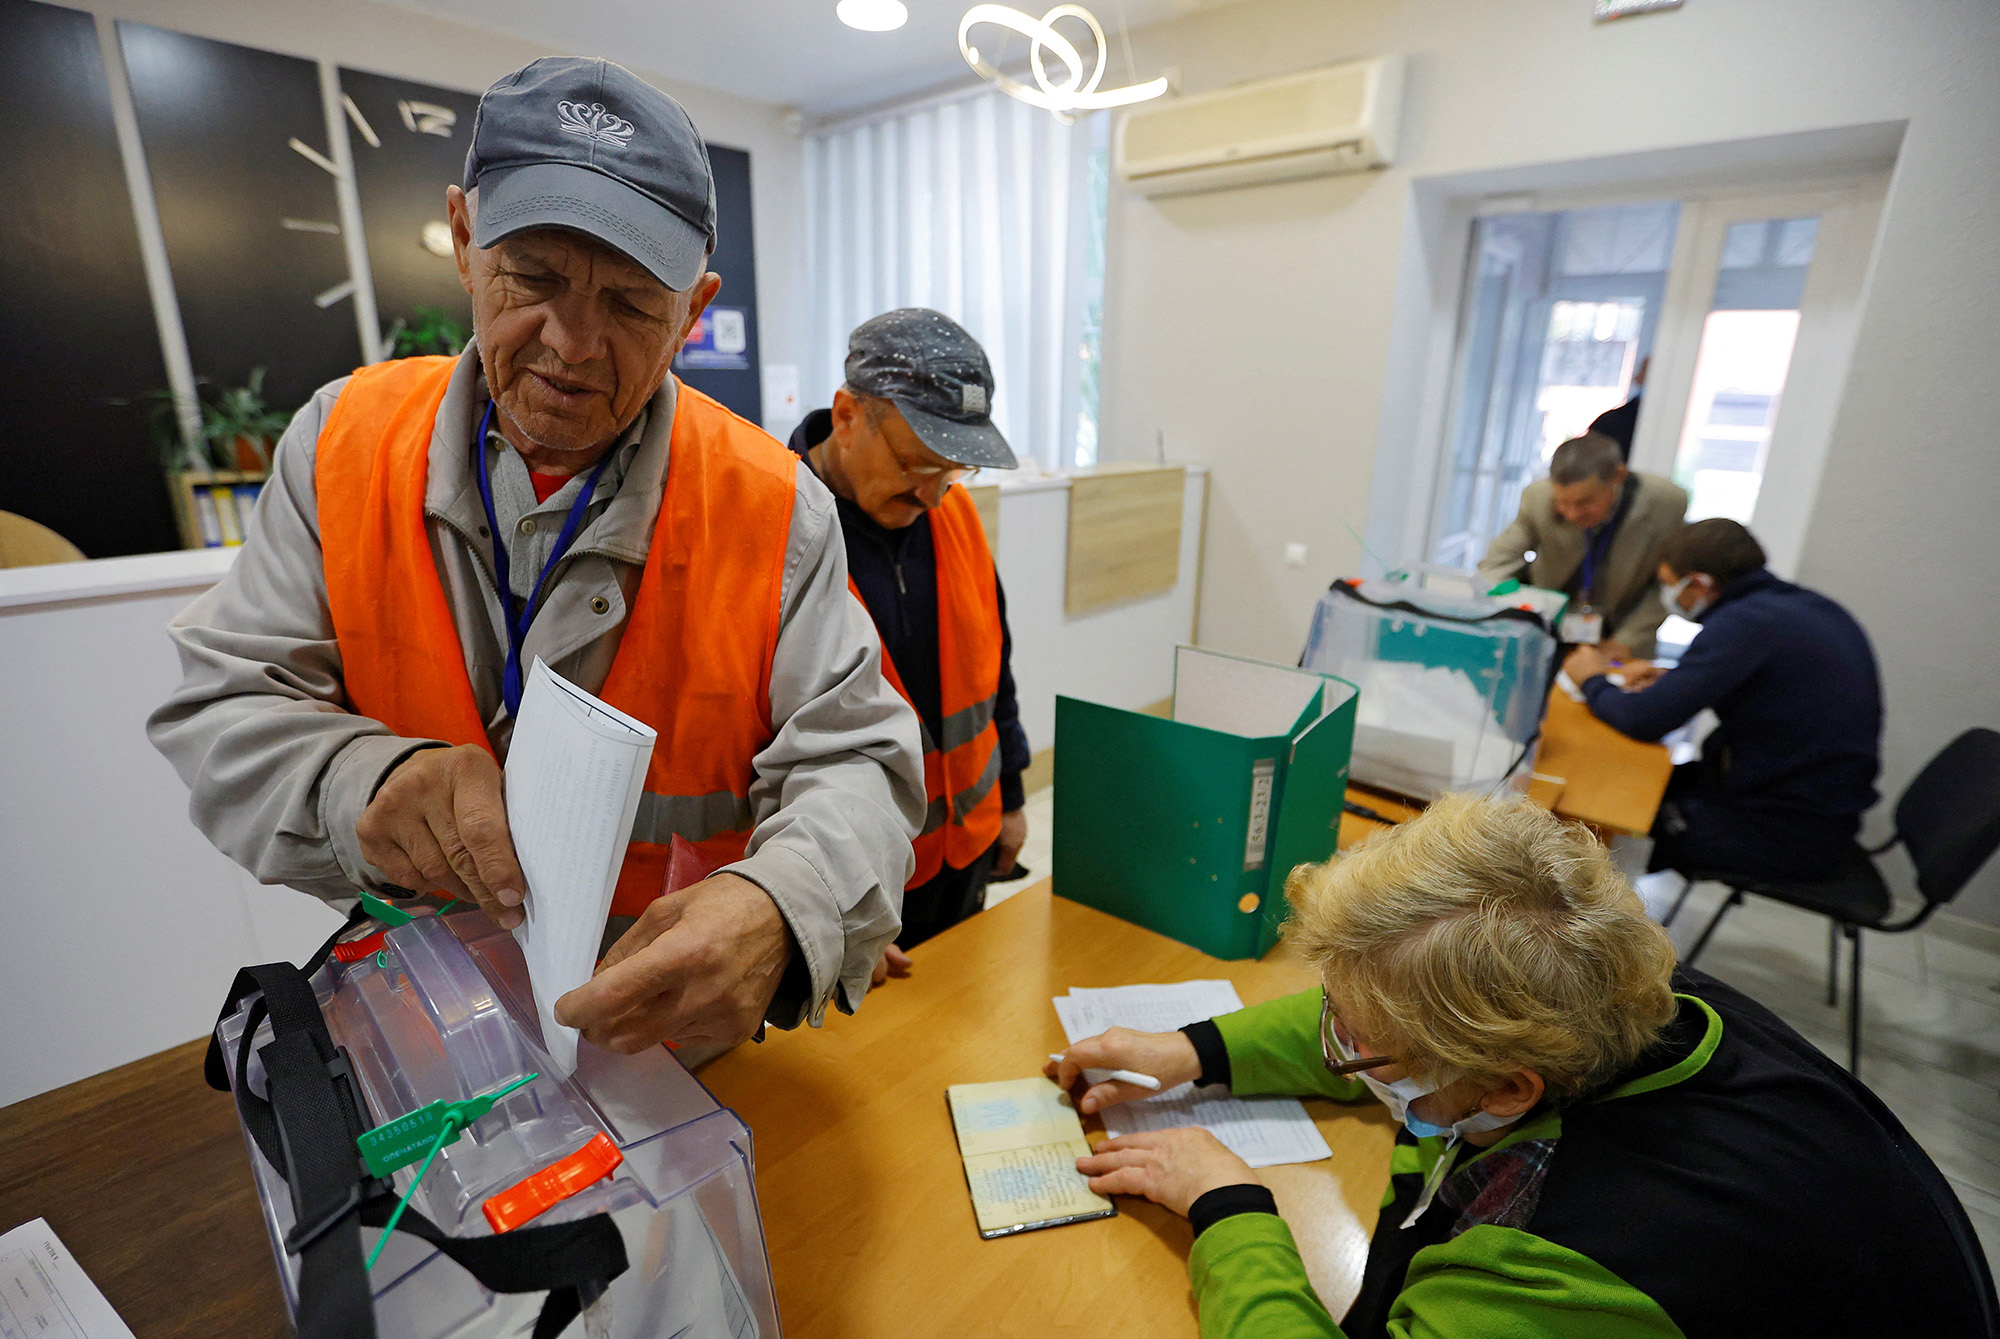 A municipal worker casts his ballot during a referendum on the secession of the Zaporizhzhia region from Ukraine and its joining Russia, in the Russian-controlled city of Melitopol, Ukraine, on September 26.